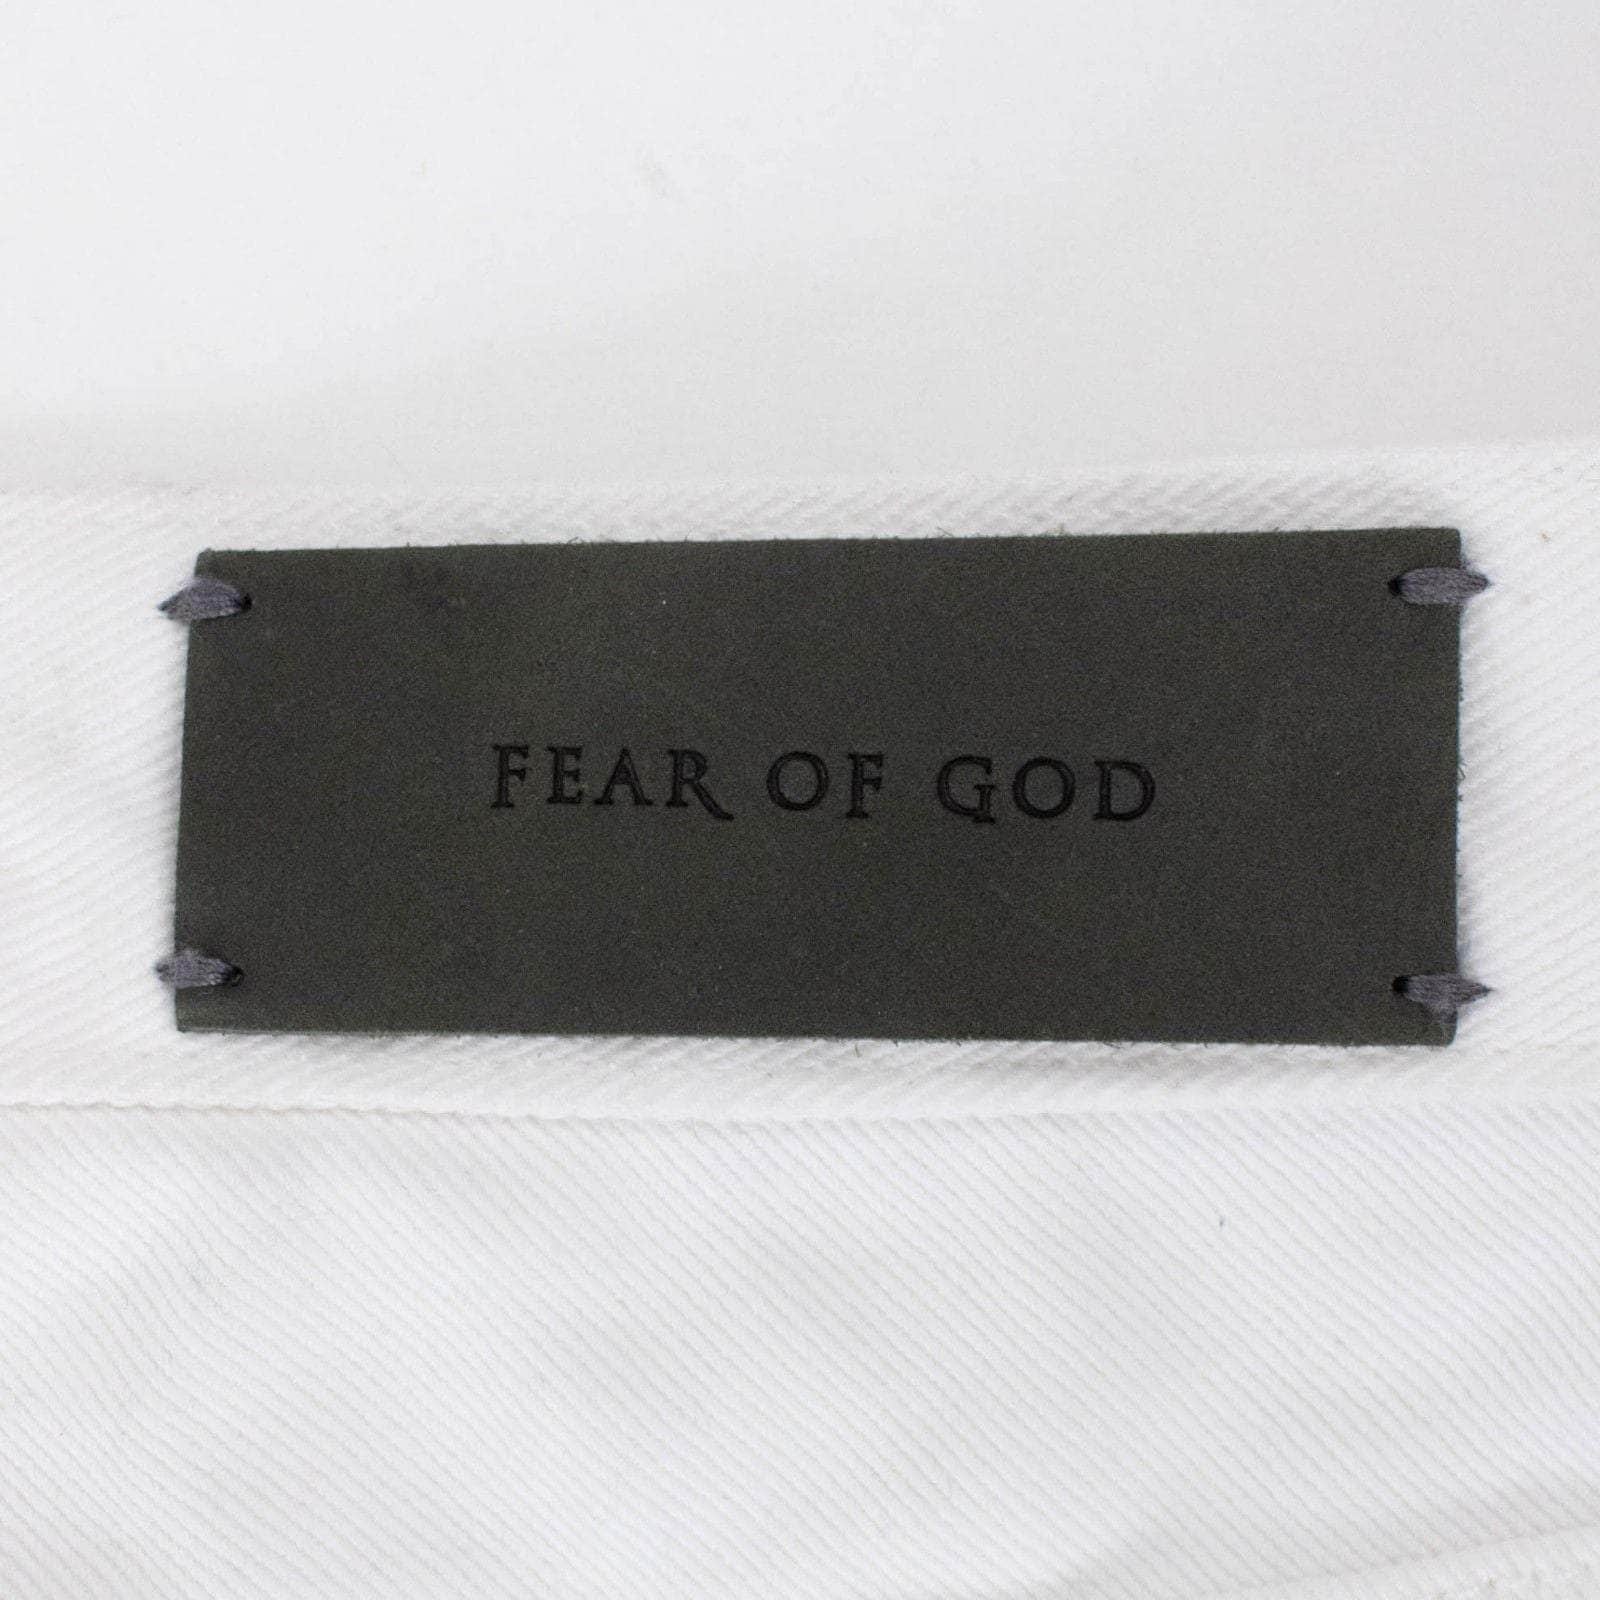 Fear Of God chicmi, couponcollection, fear-of-god, gender-mens, main-clothing, mens-shoes, mens-skinny-jeans, size-28, under-250 28 Fourth Collection White Distressed Jeans 58LE-1133/28 58LE-1133/28